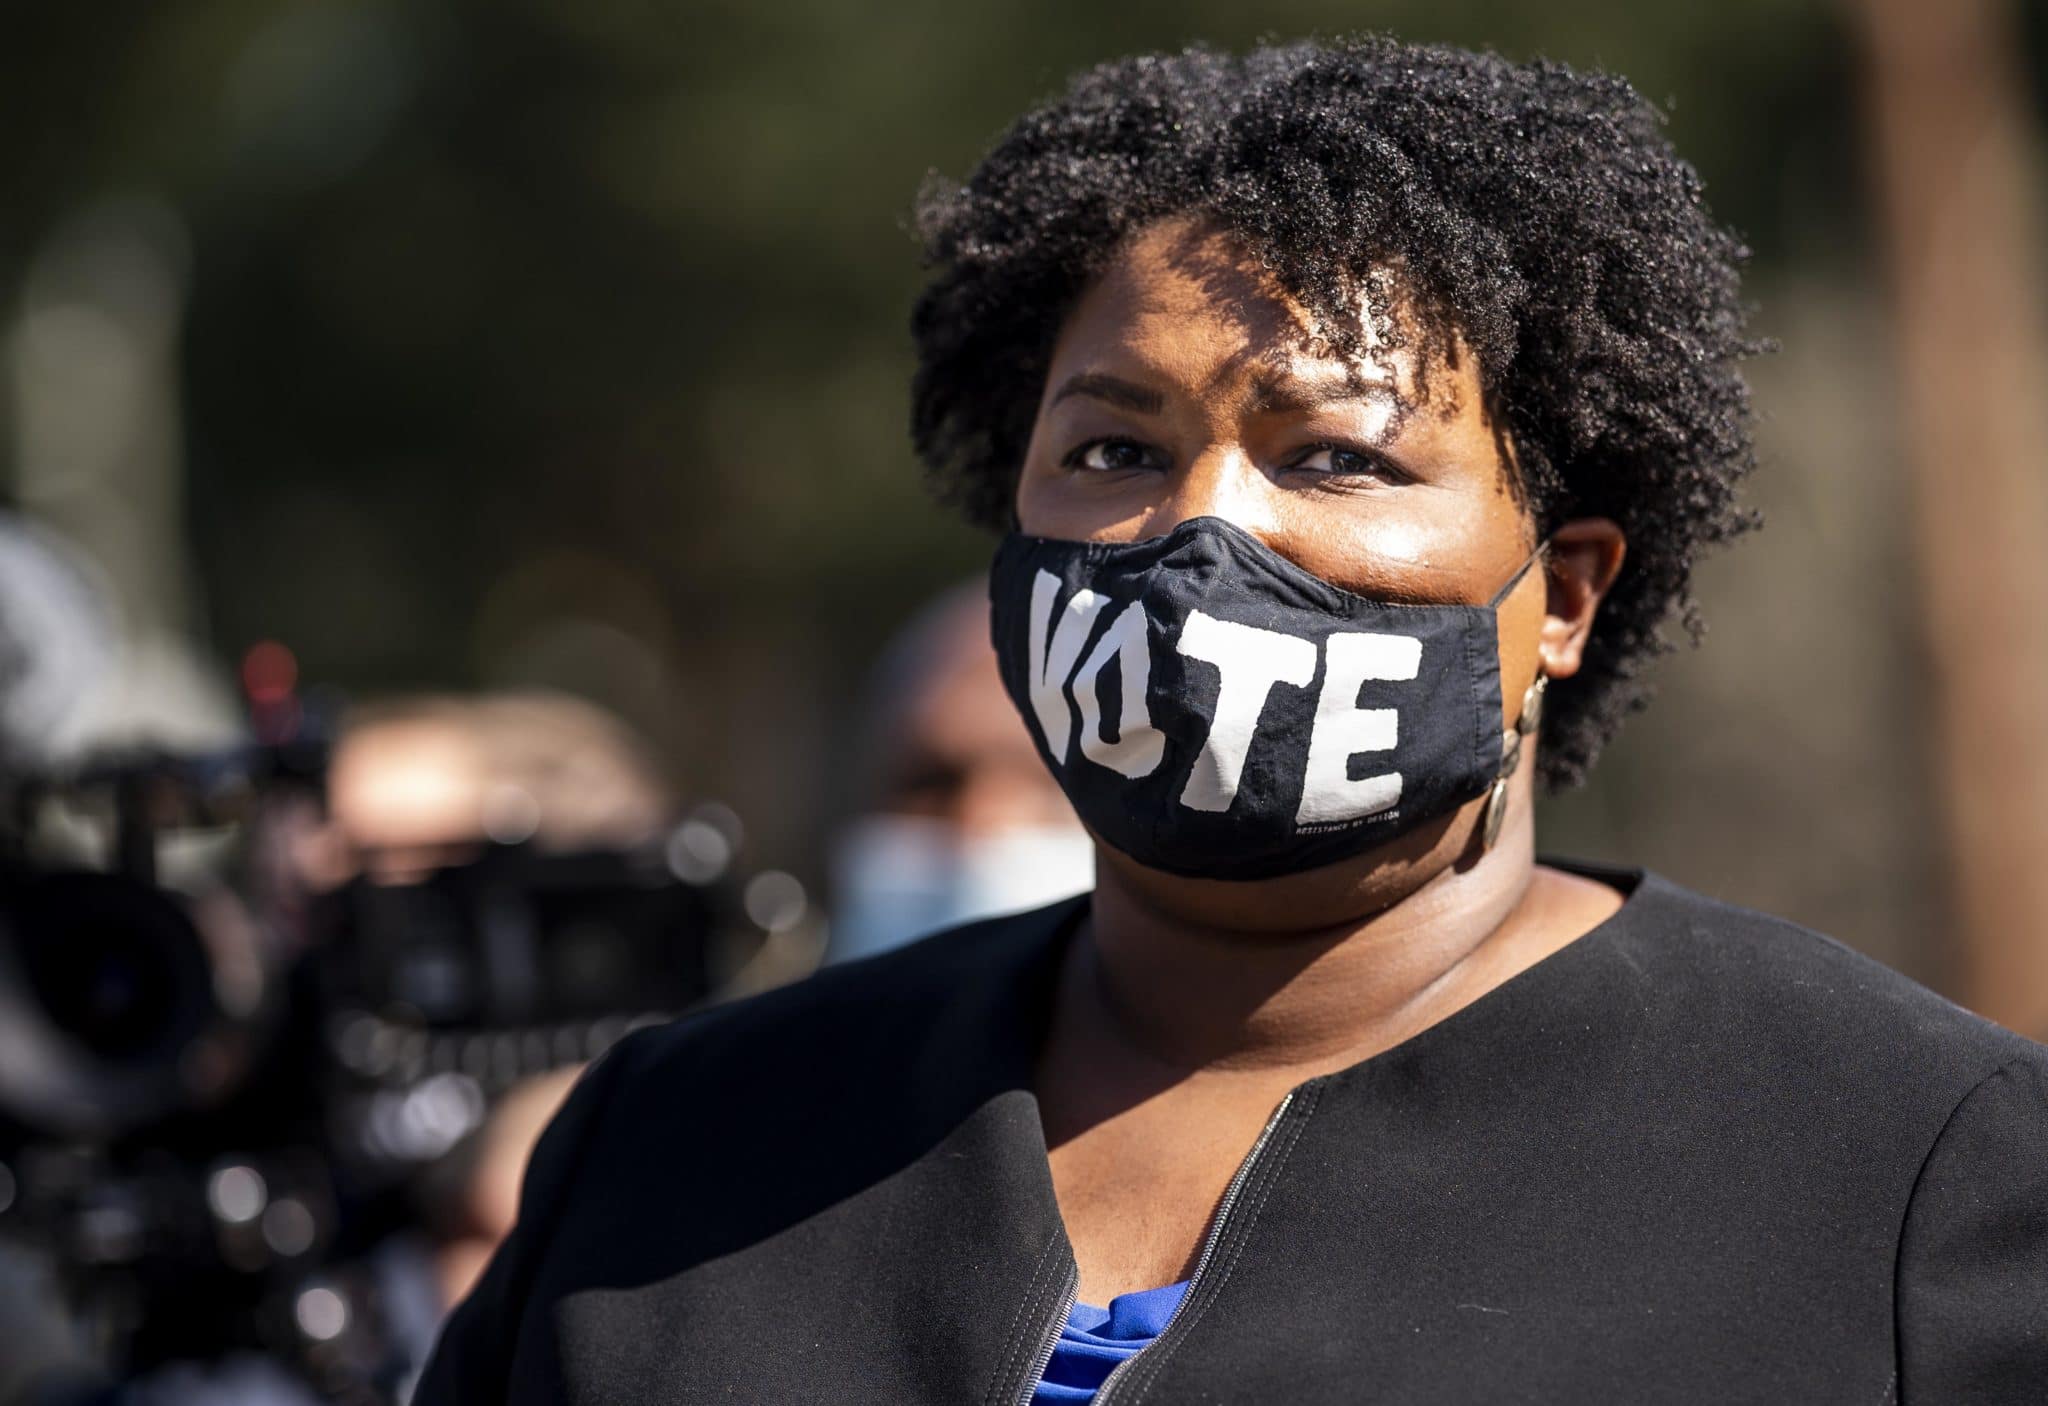 Georgia Democratic activist Stacey Abrams has been credited with reviving the party's fortunes in the state through voter registration efforts